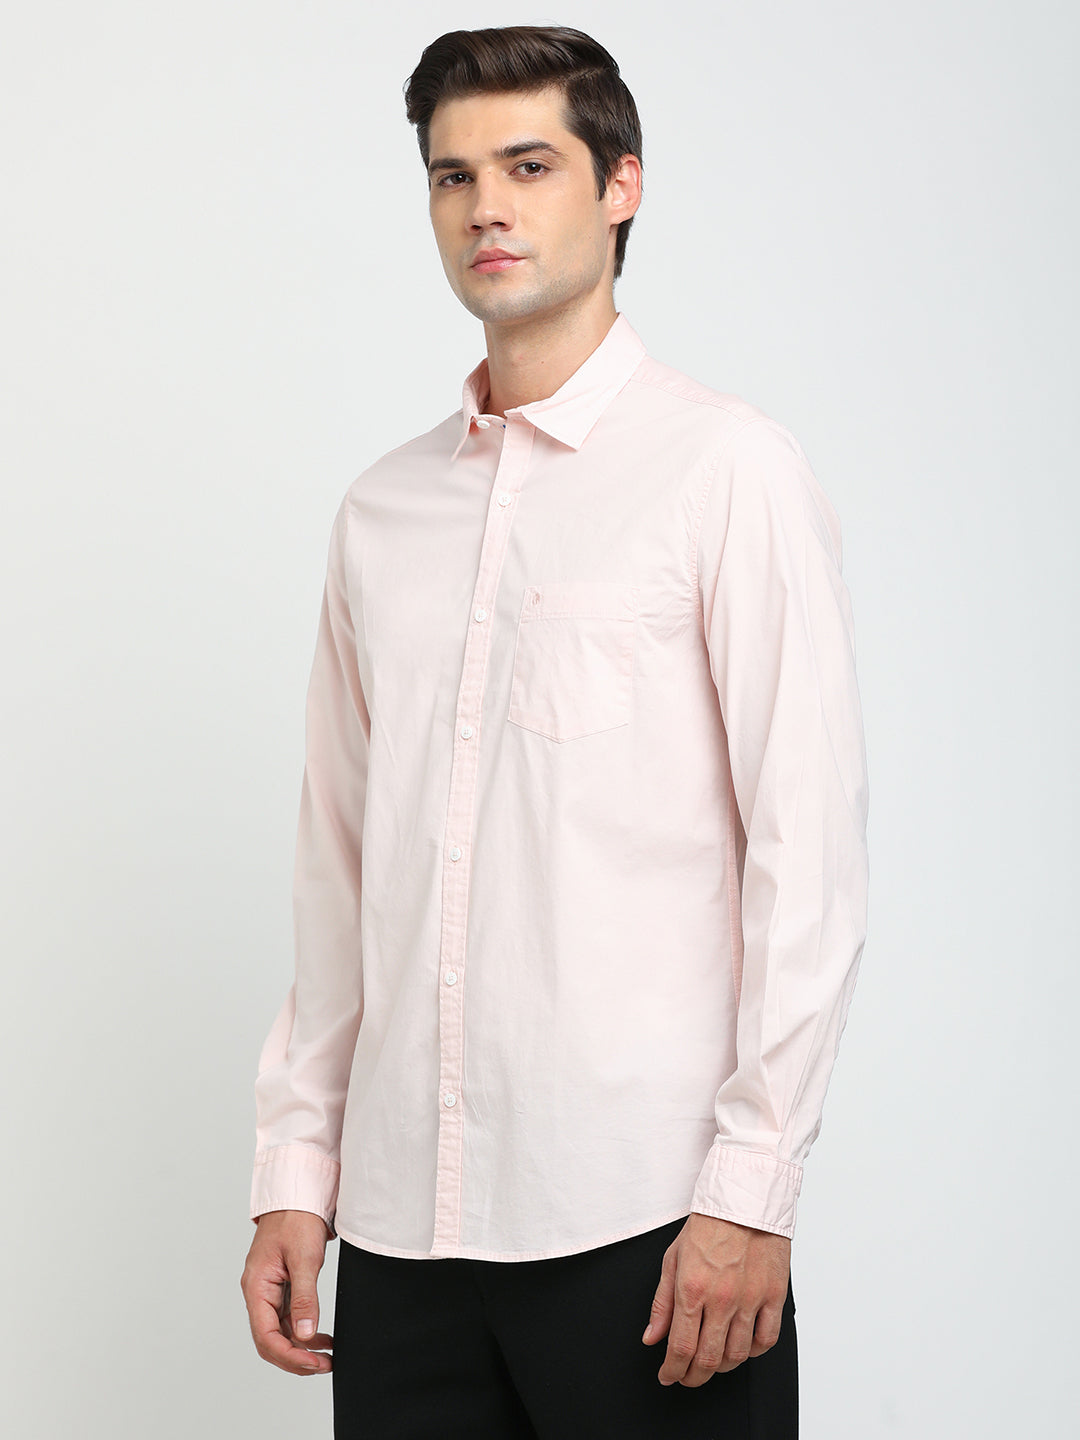 Cotton Stretch Pink Plain Slim Fit Full Sleeve Casual Shirt